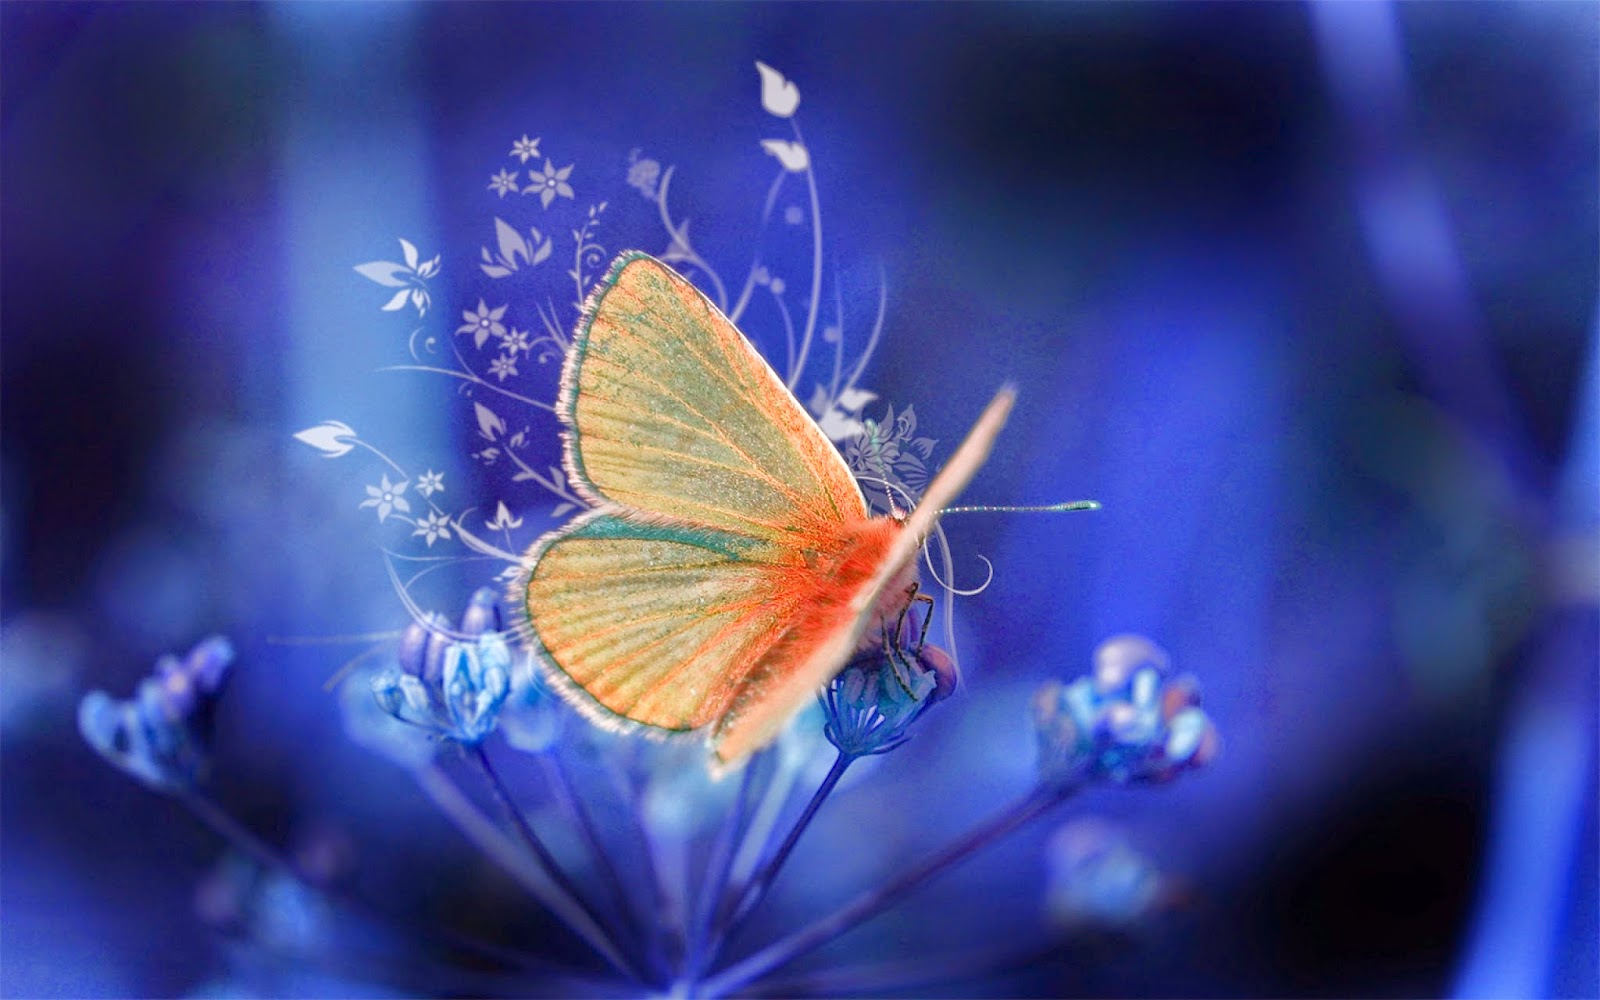 Whatsapp Dp Images With Butterfly - HD Wallpaper 